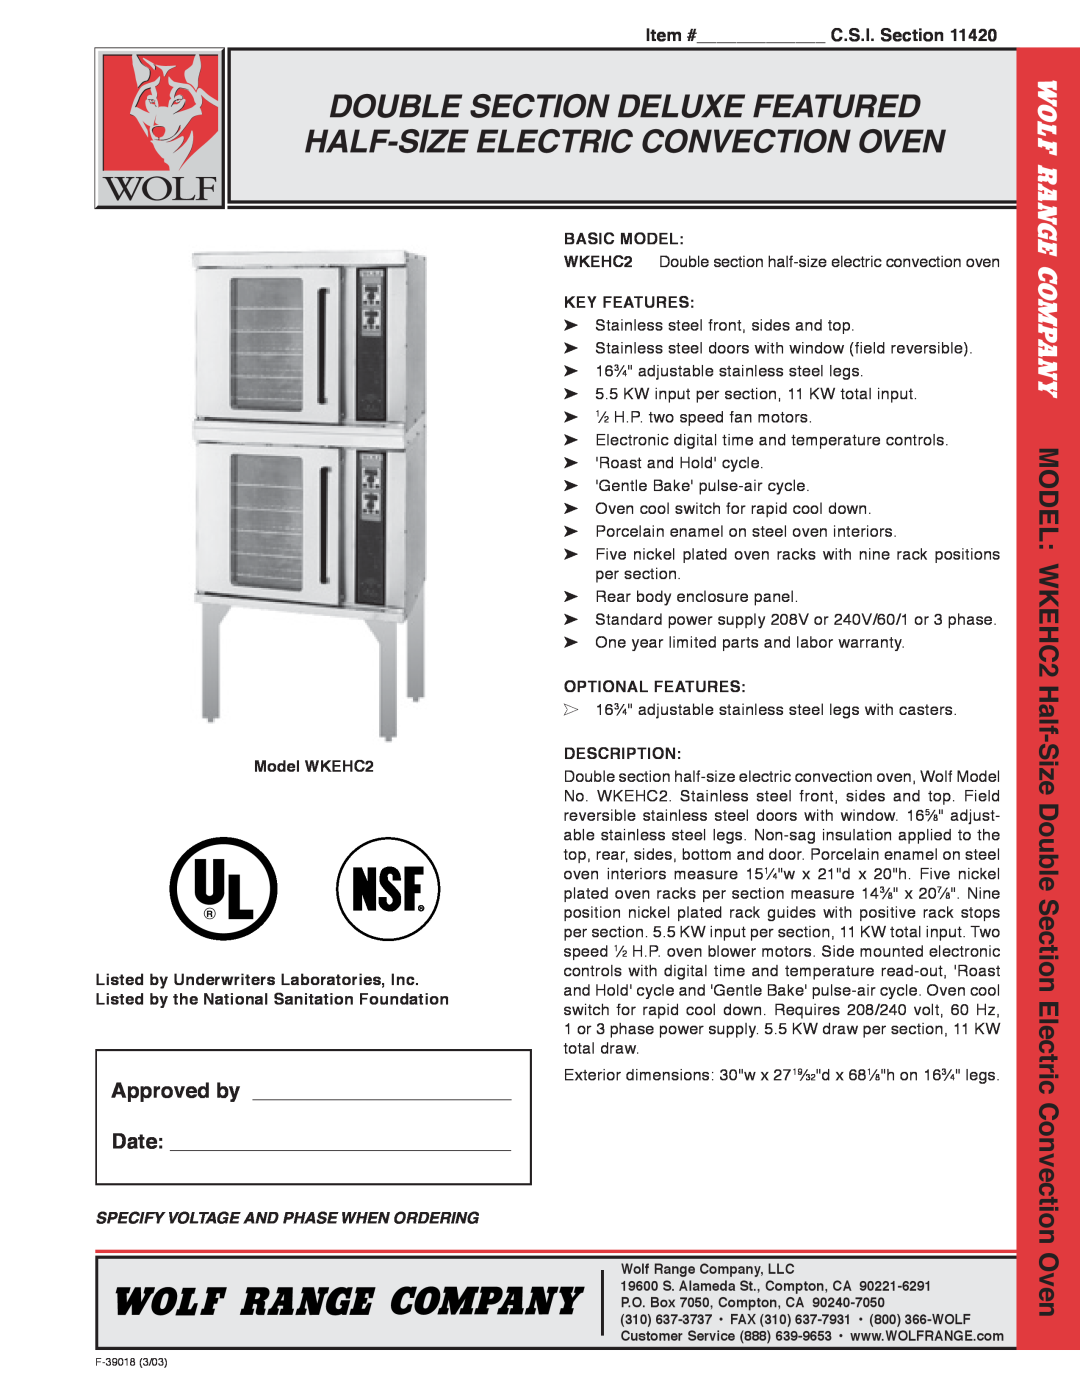 Wolf WKEHC2 warranty Double Section Deluxe Featured Half-Size Electric Convection Oven, Item # C.S.I. Section 